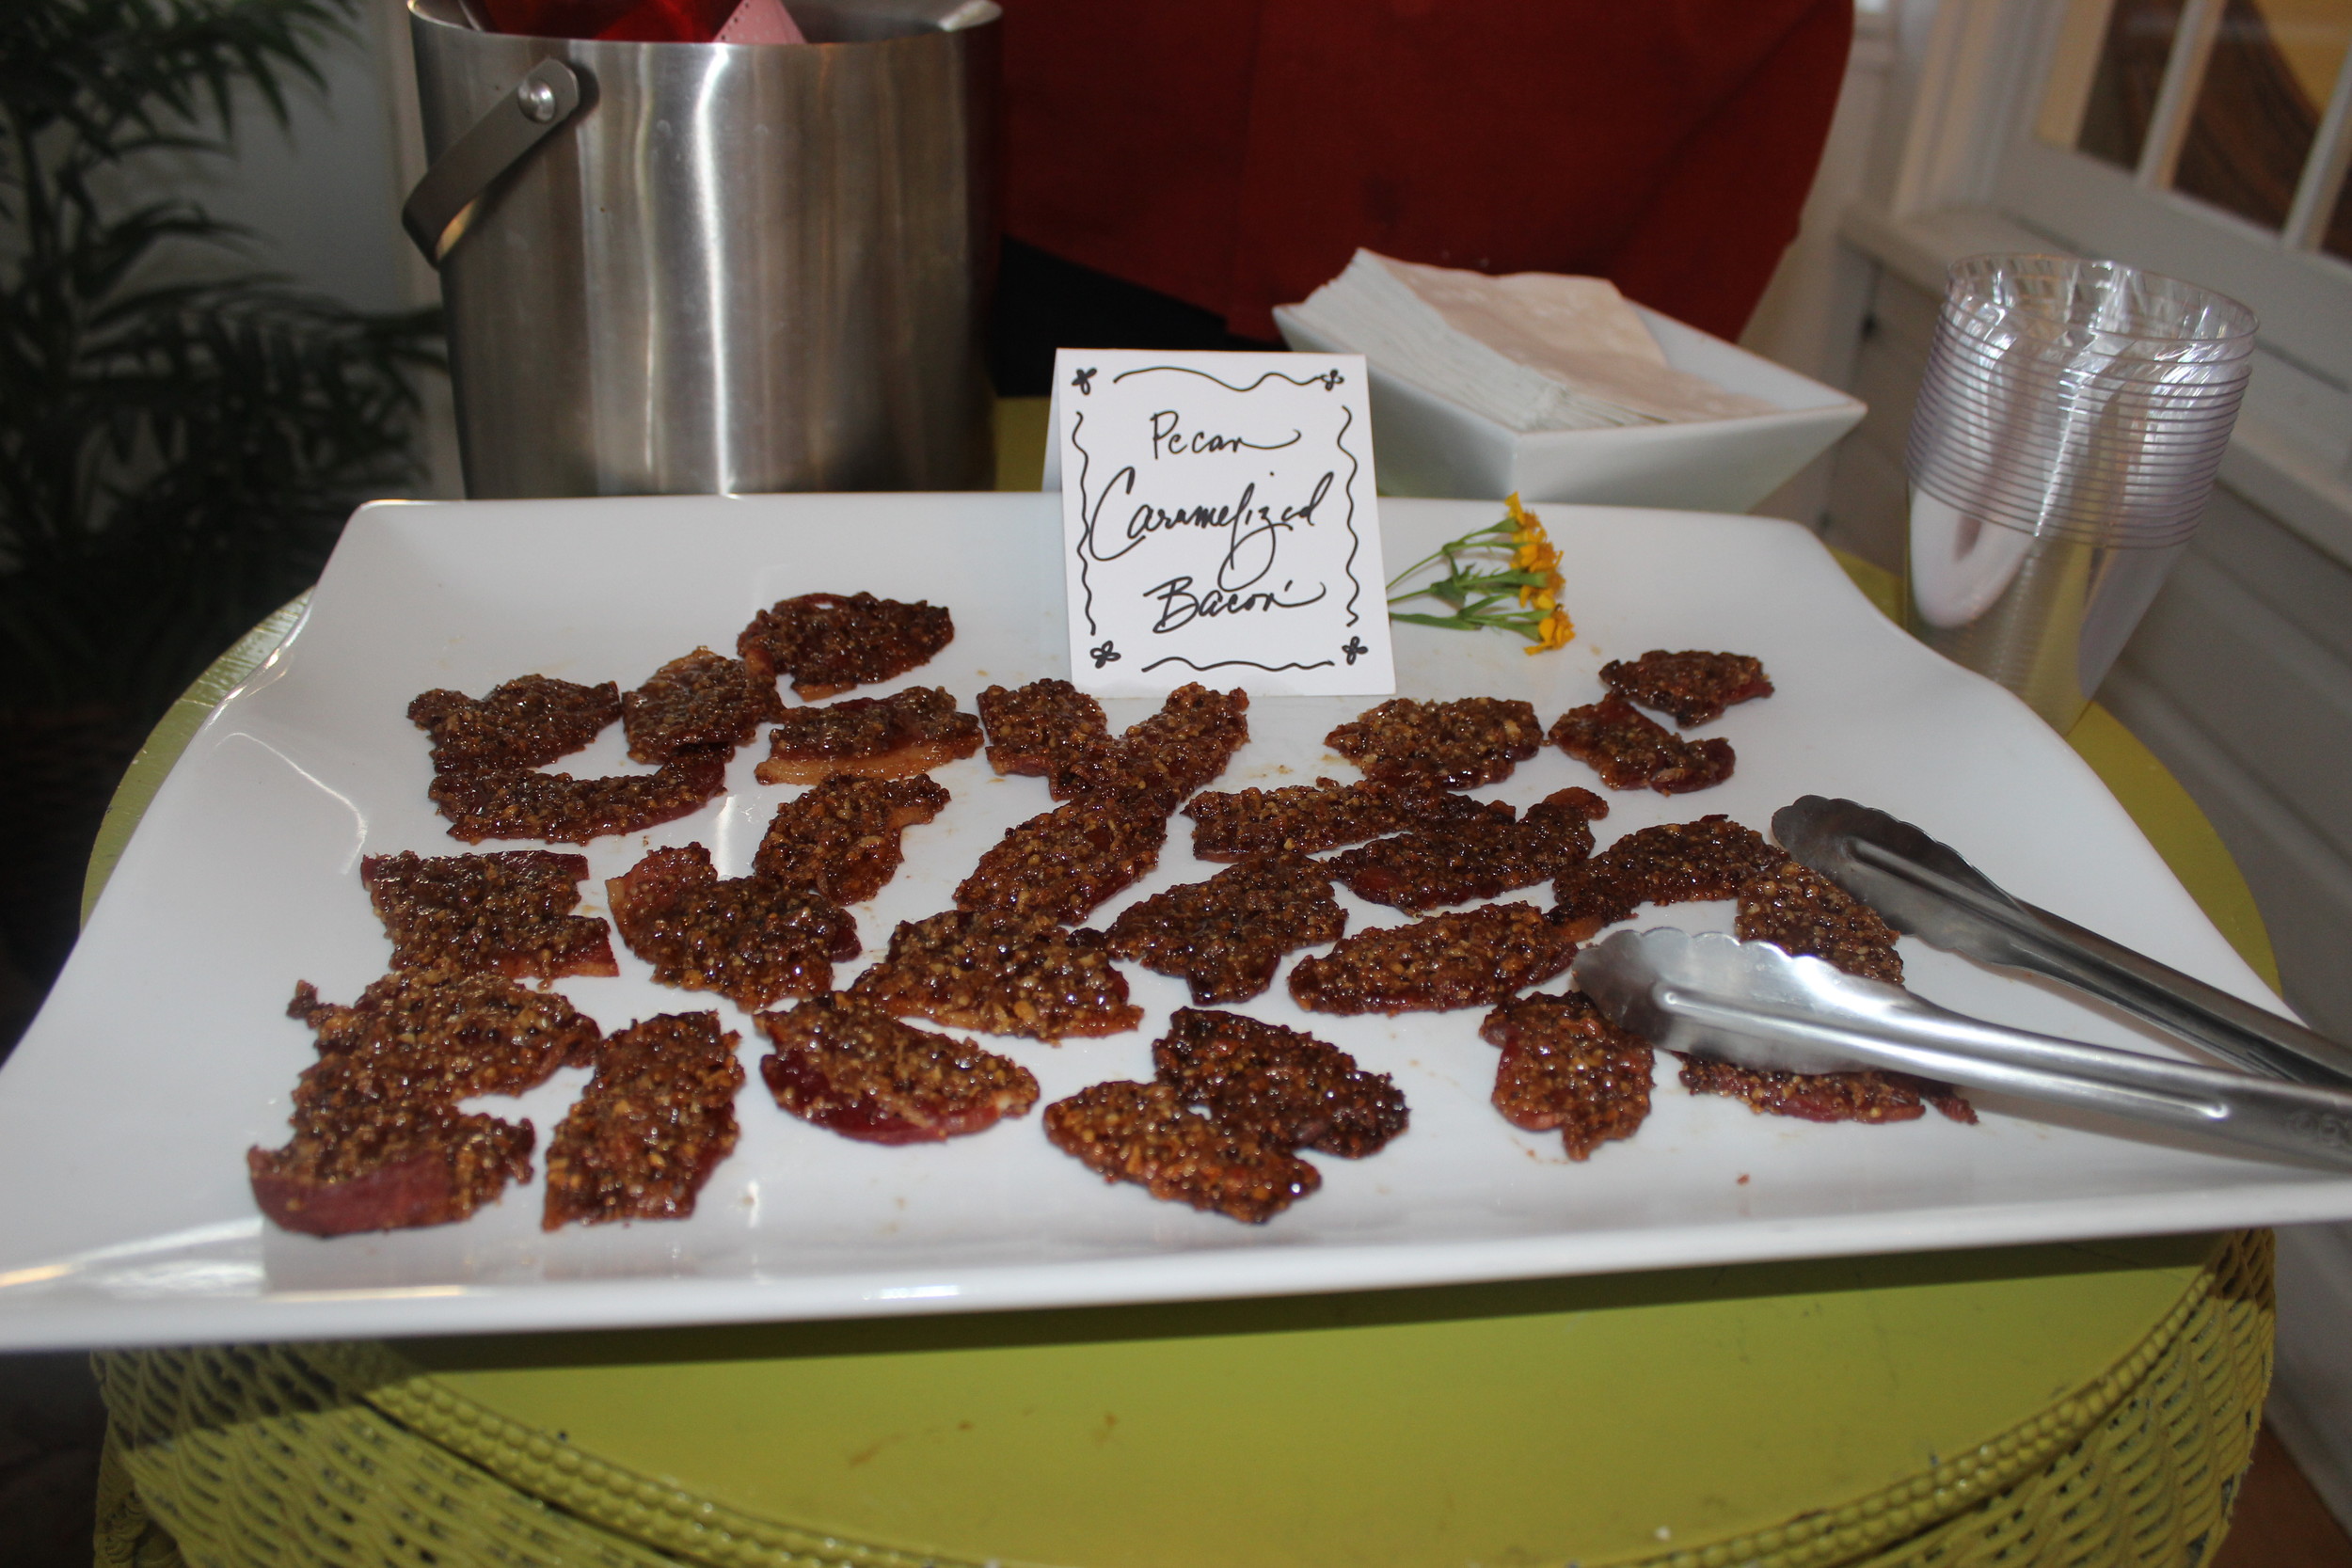 Pecan caramelized bacon at Gregory Paul’s